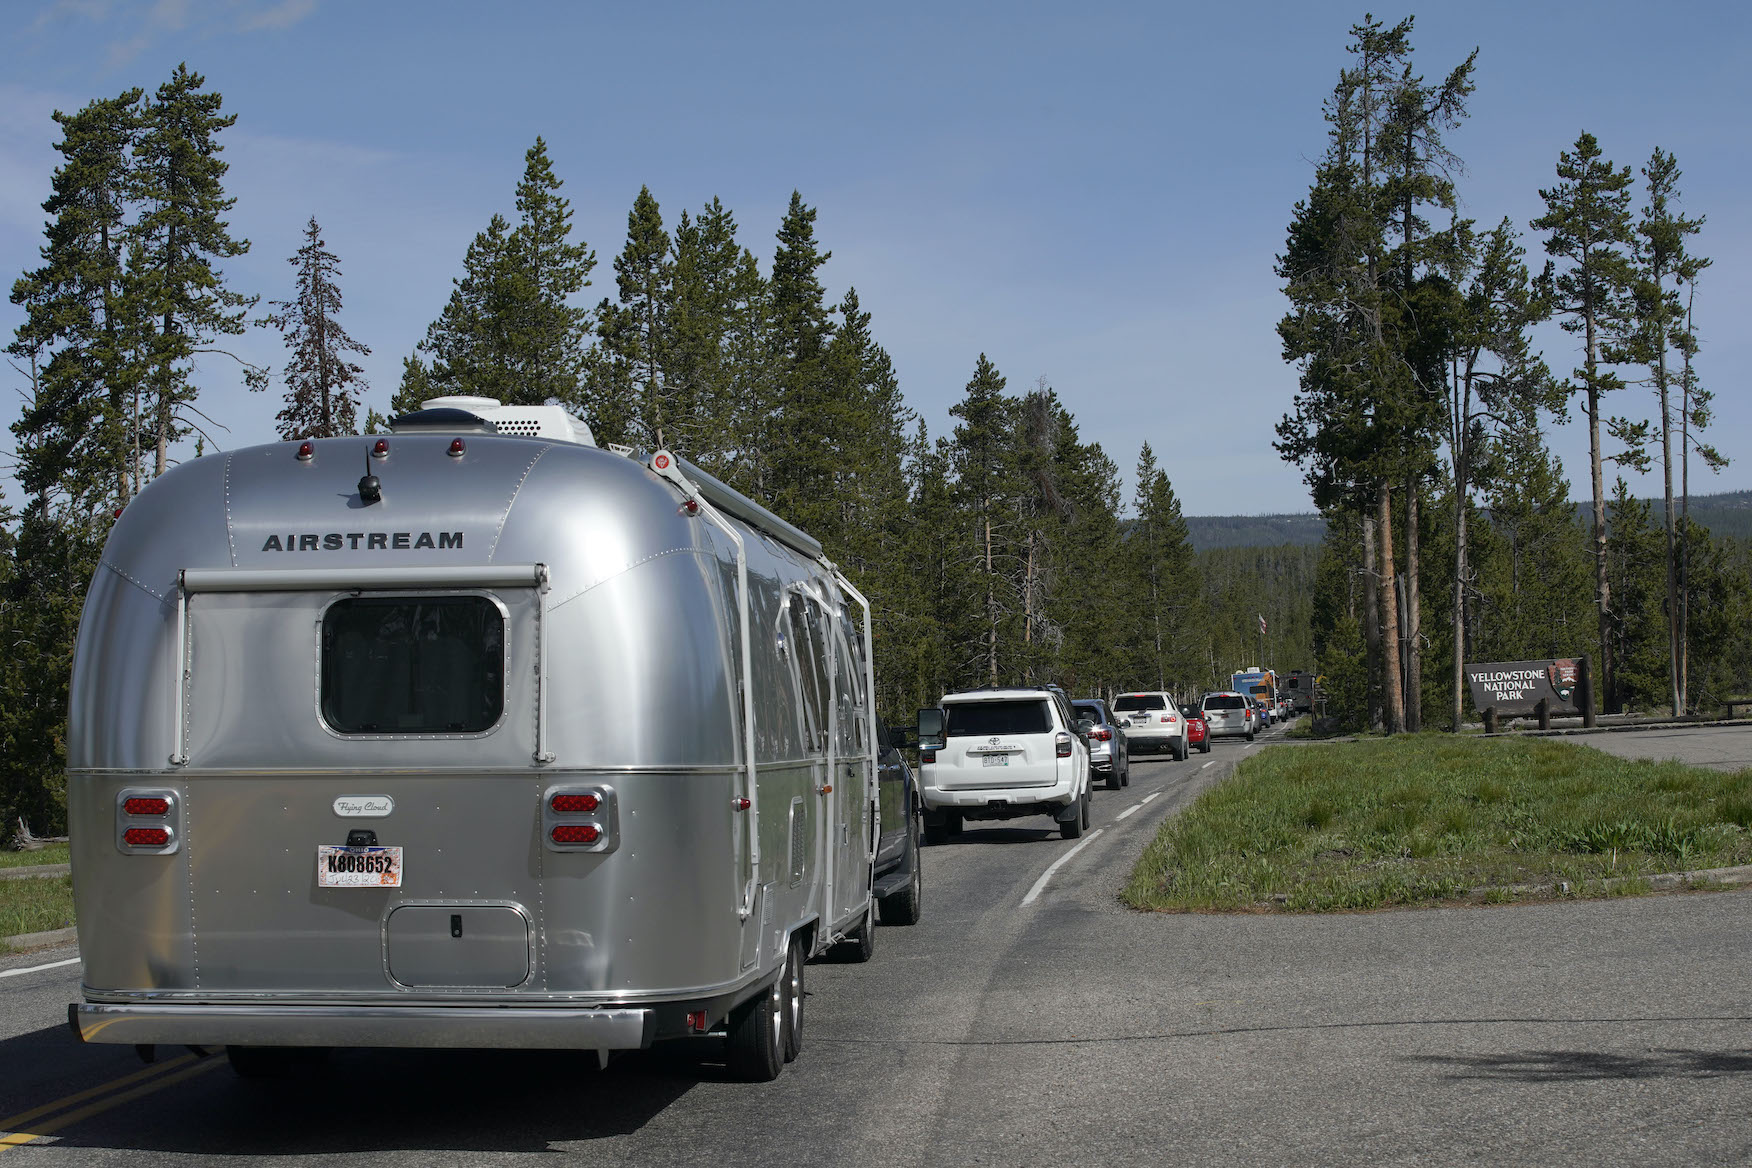 An Airstream RV trailer along with others, wait in a long line to enter the south entrance to Yellowstone National Park